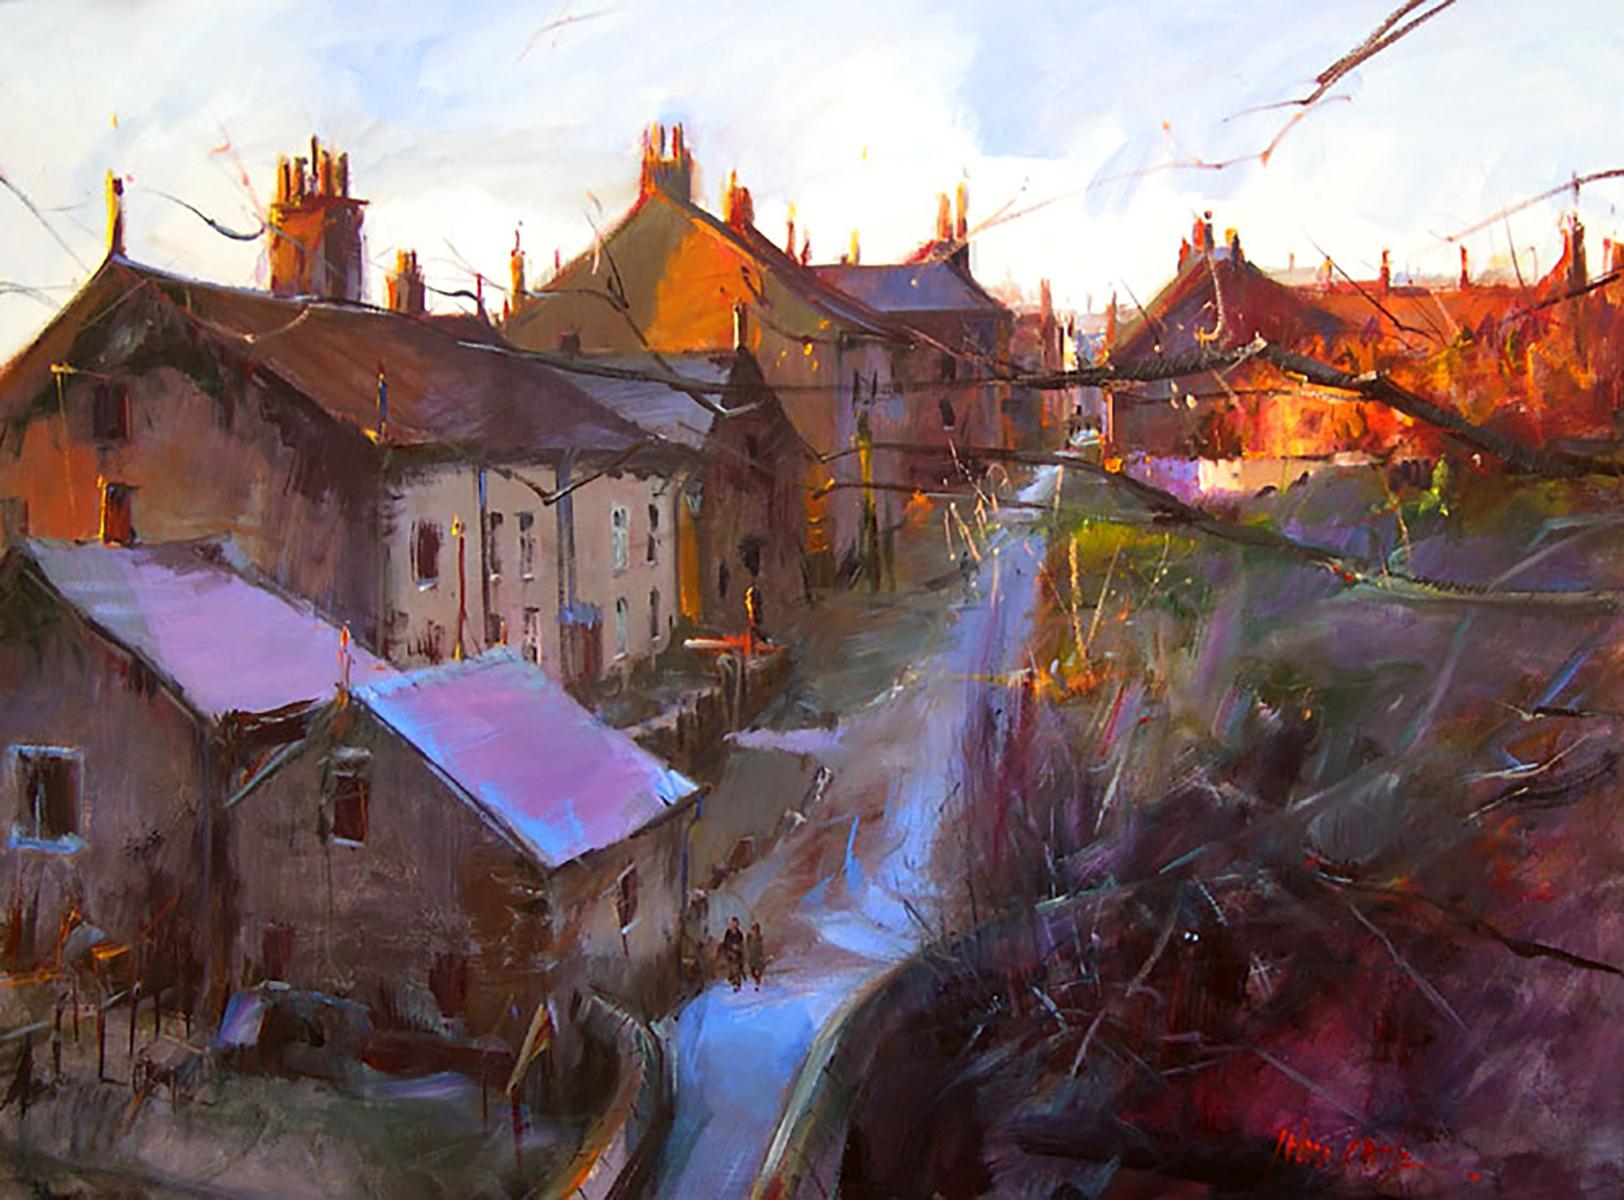 "The Path, Derbyshire", John Cook, Oil on Canvas, 36x48, Impressionism, England